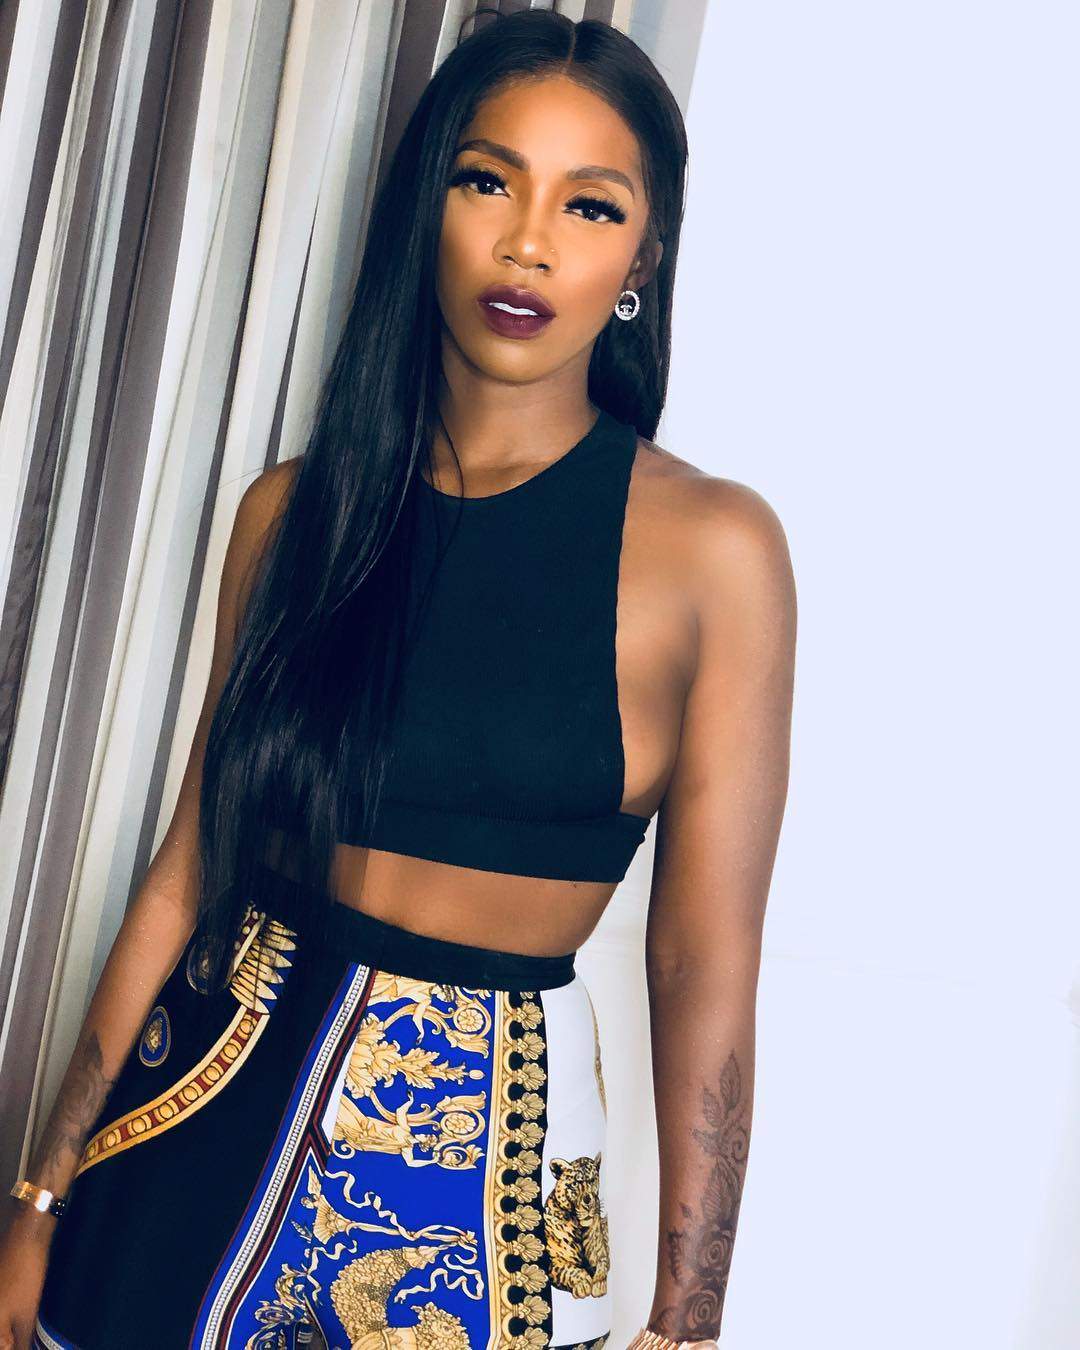 Tiwa Savage left in shock after she was pulled down on stage by an overzealous fan.